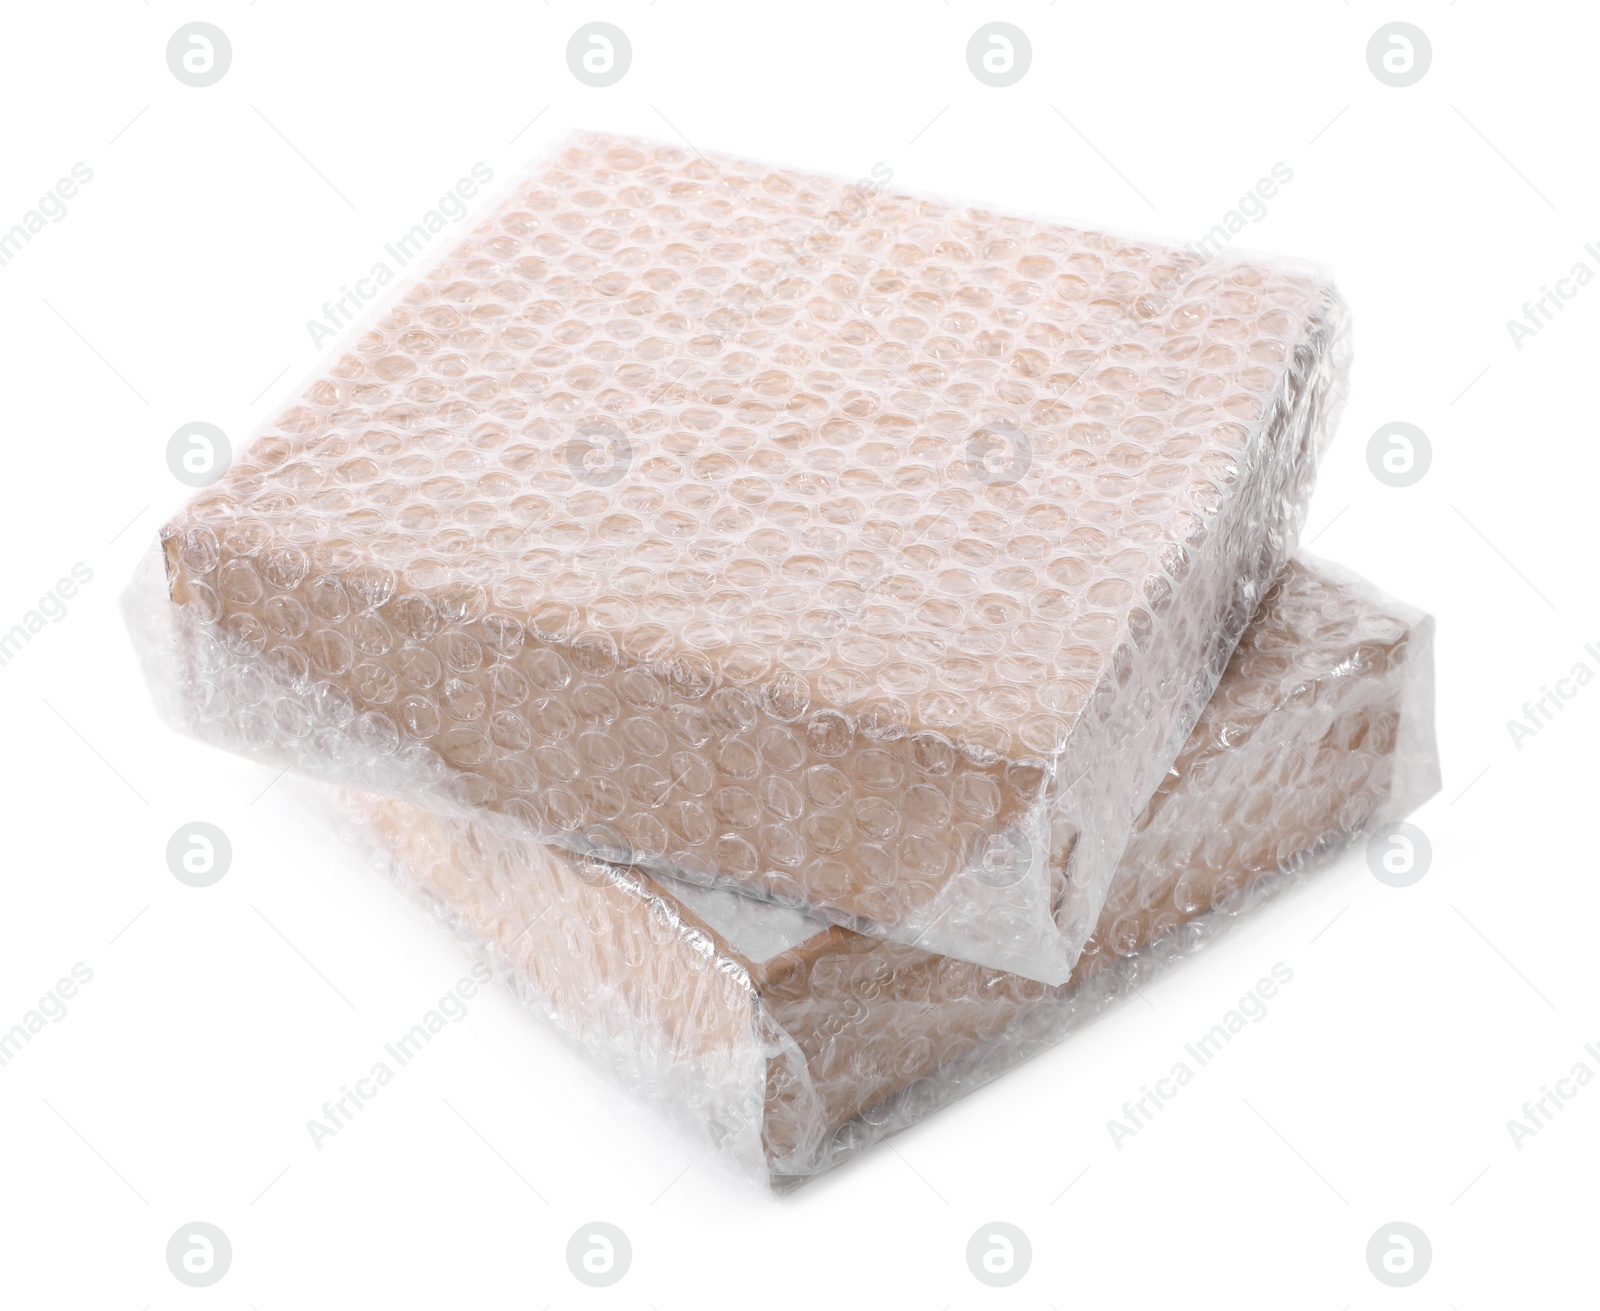 Photo of Cardboard boxes packed in bubble wrap on white background